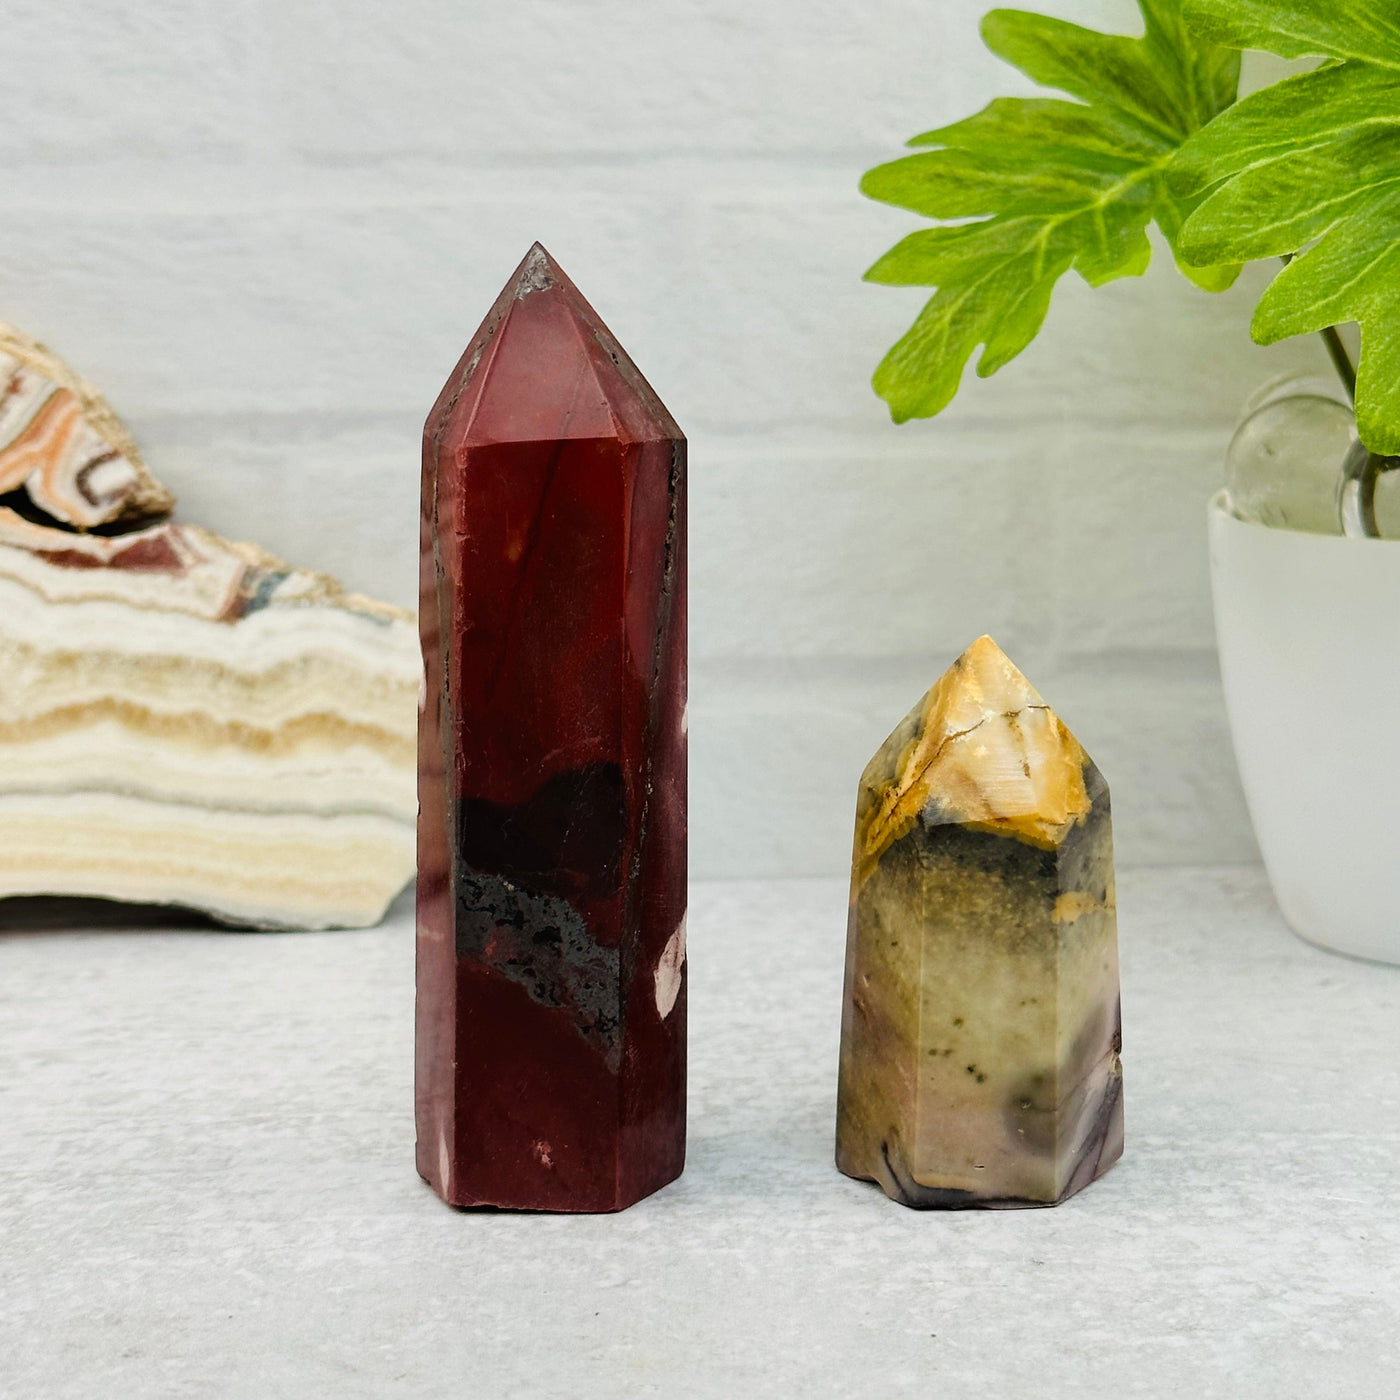 Mookaite Polished Points displayed as home decor 